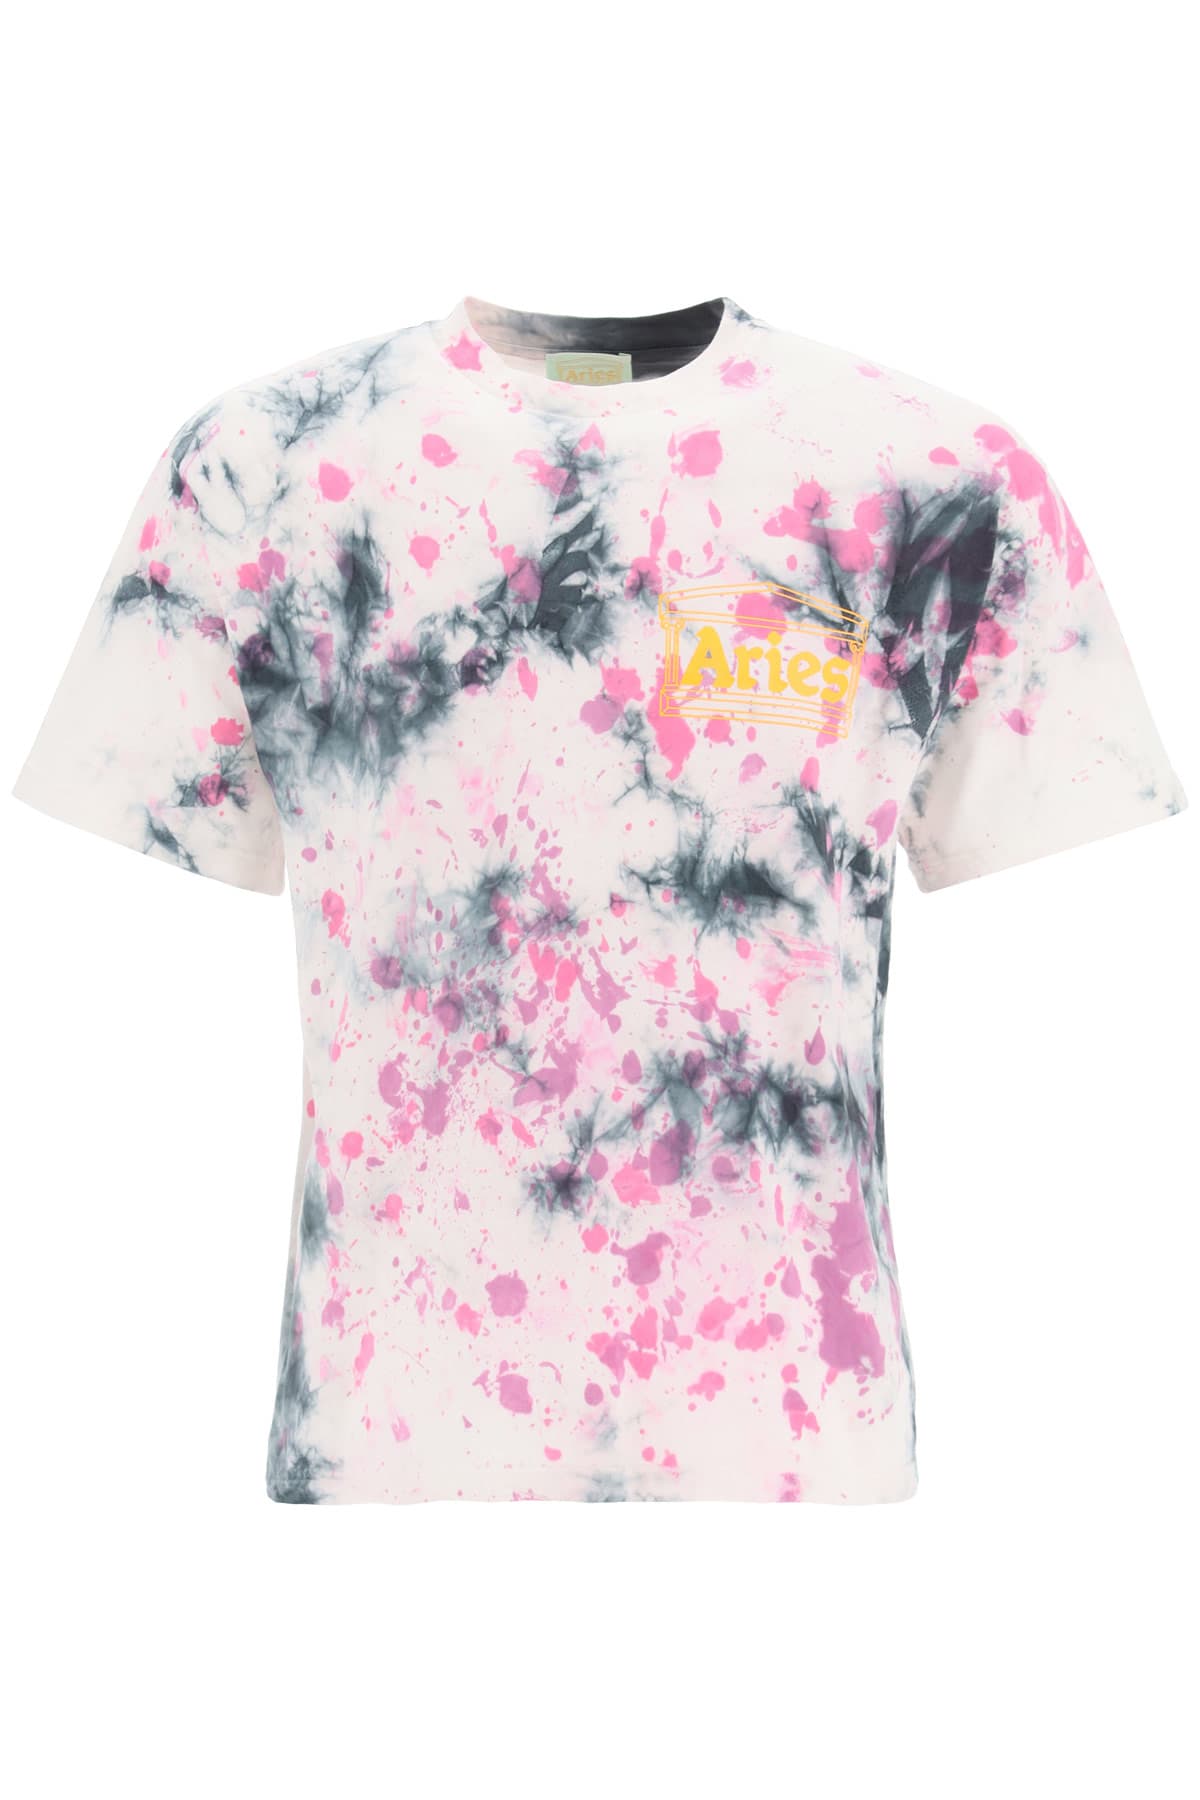 Aries Tie-dye T-shirt With Temple Logo Print